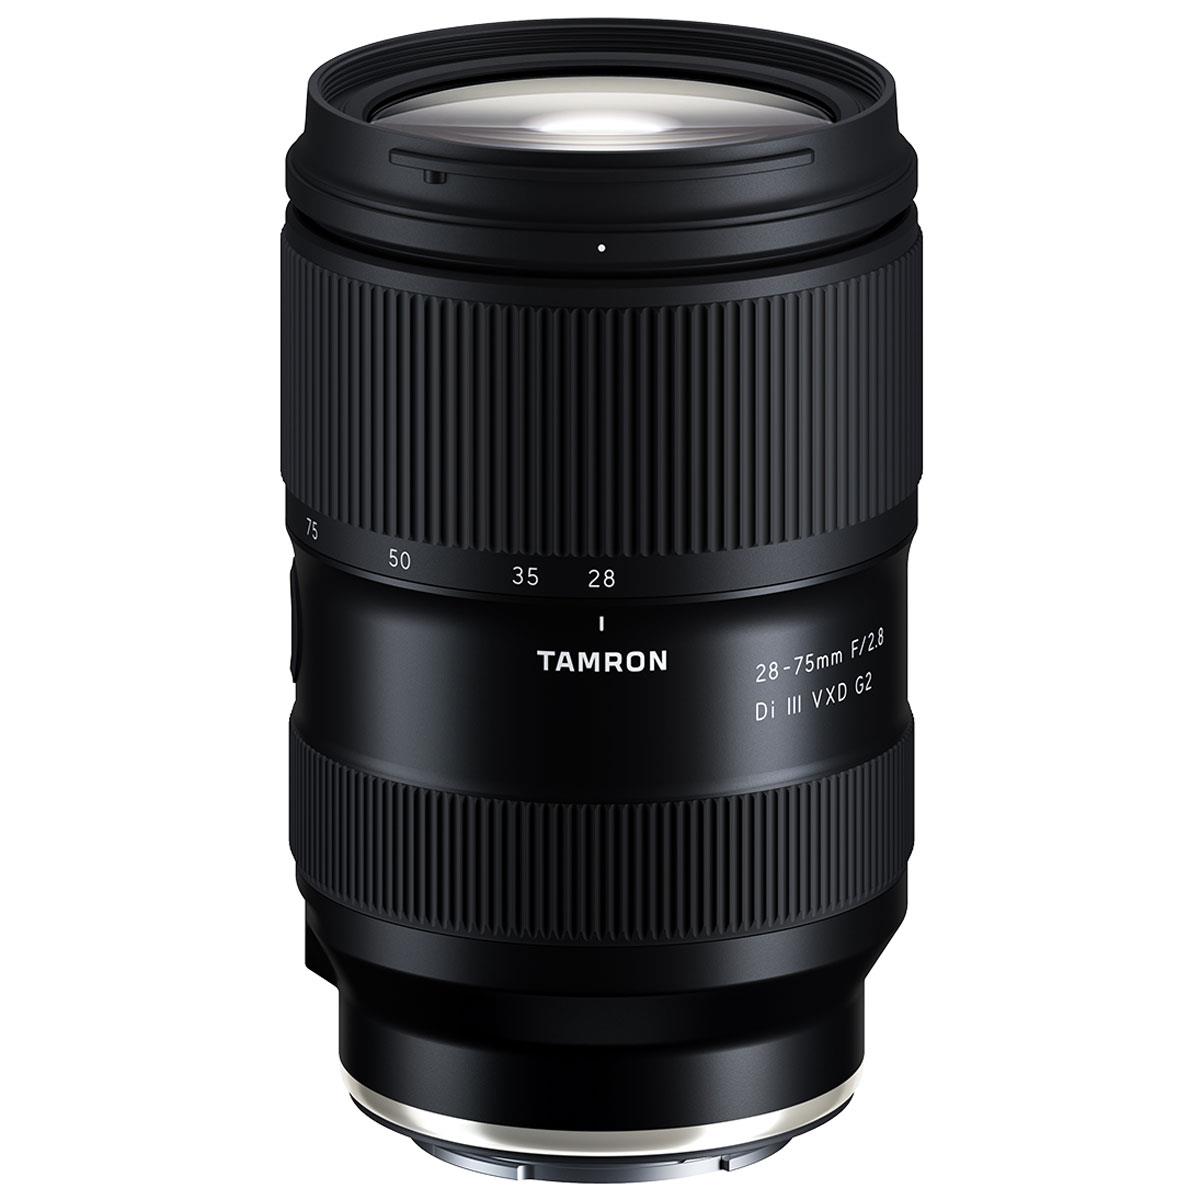 Tamron 28-75mm F/2.8 Di III VXD G2 Lens for Sony E Mount